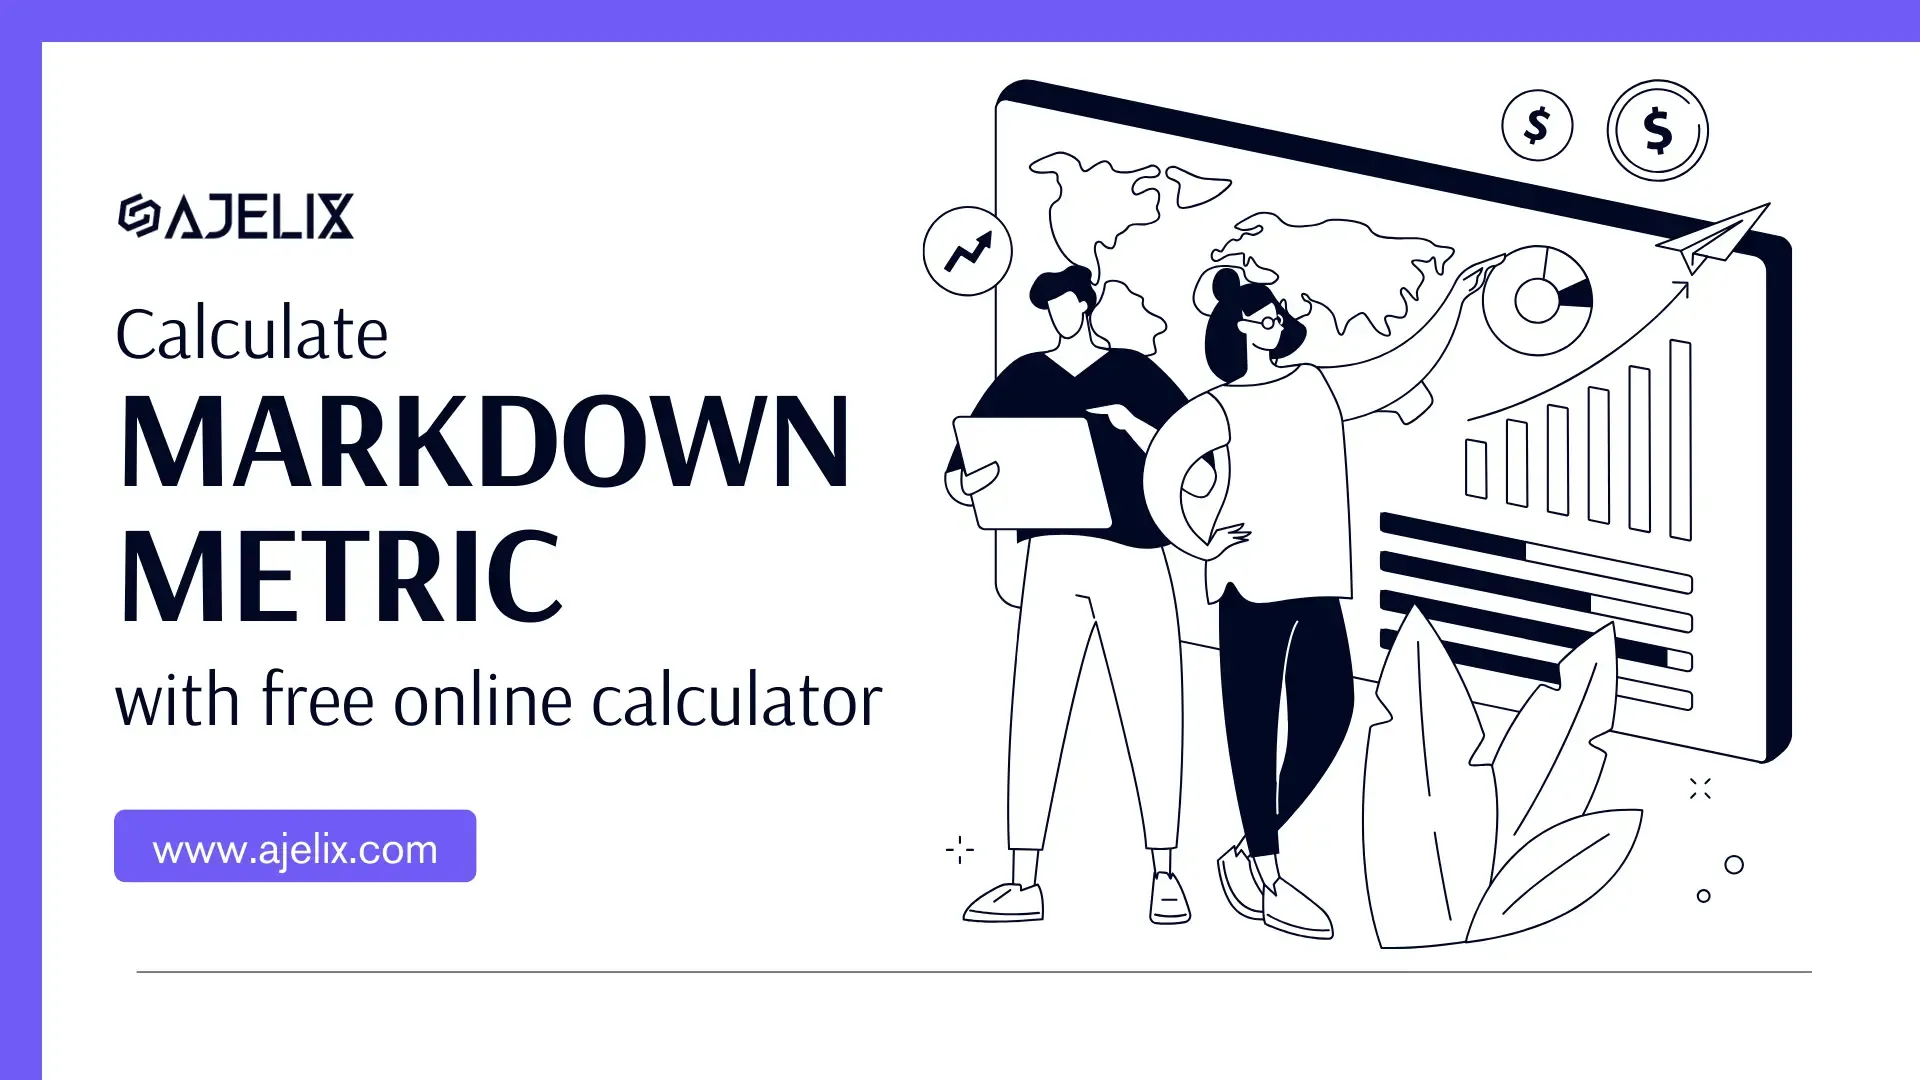 Calculate markdown metric with free online calculator banner